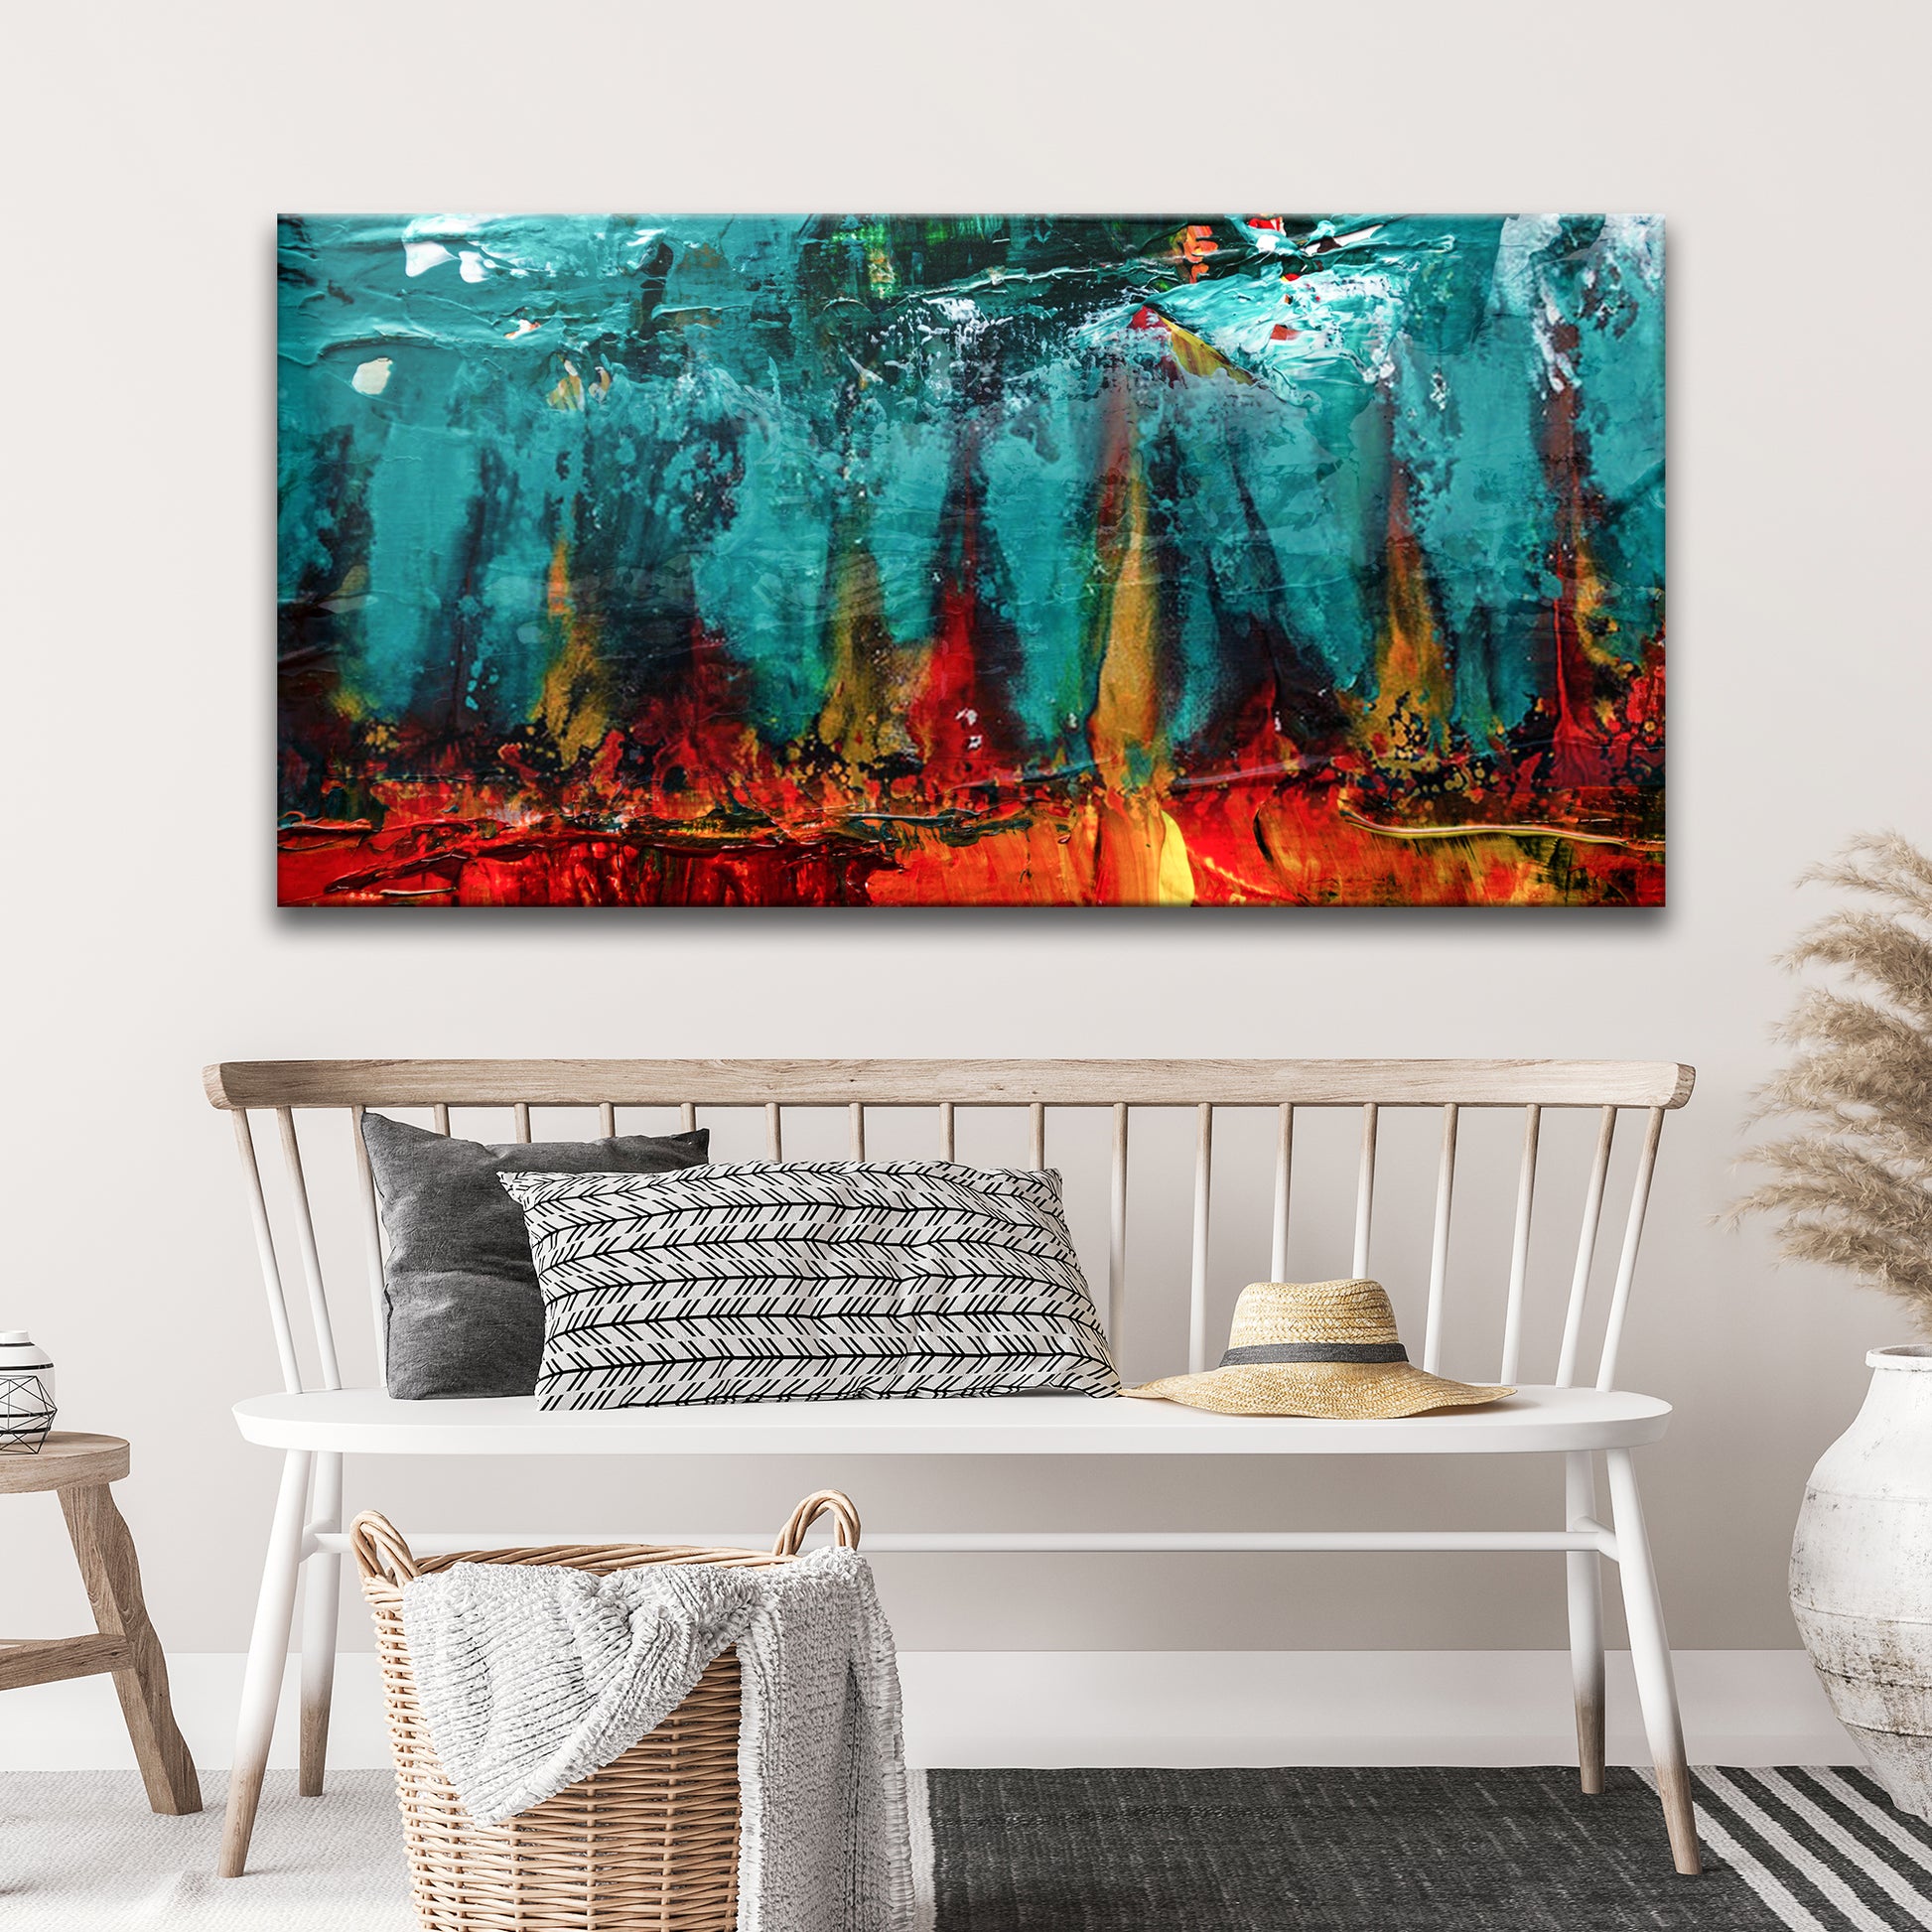 Teal Flame Effect Canvas Wall Art Style 1 - Image by Tailored Canvases